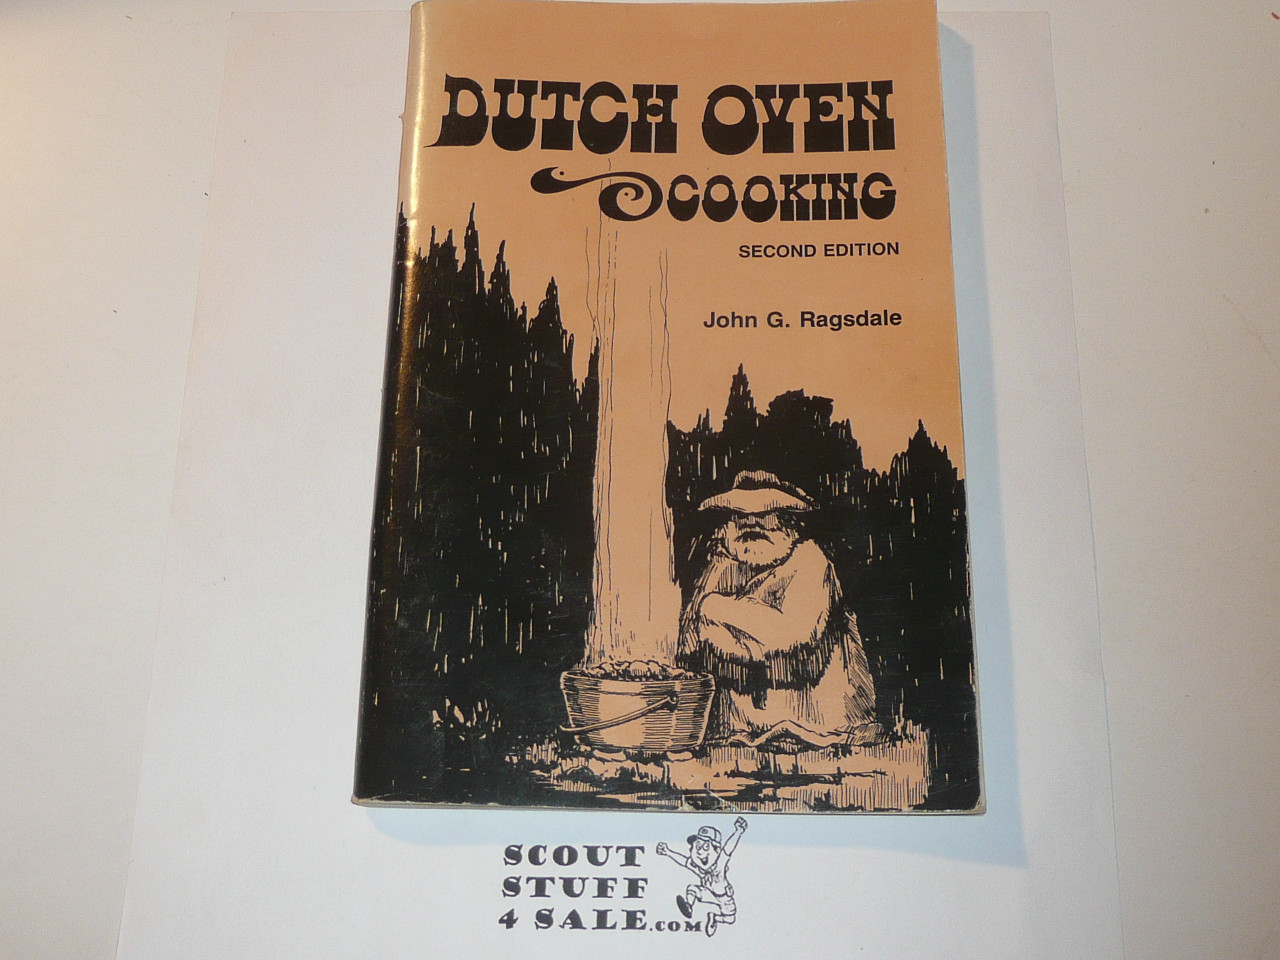 Dutch Oven Cooking, By John G. Ragsdale, Second Edition, 1988 Printing